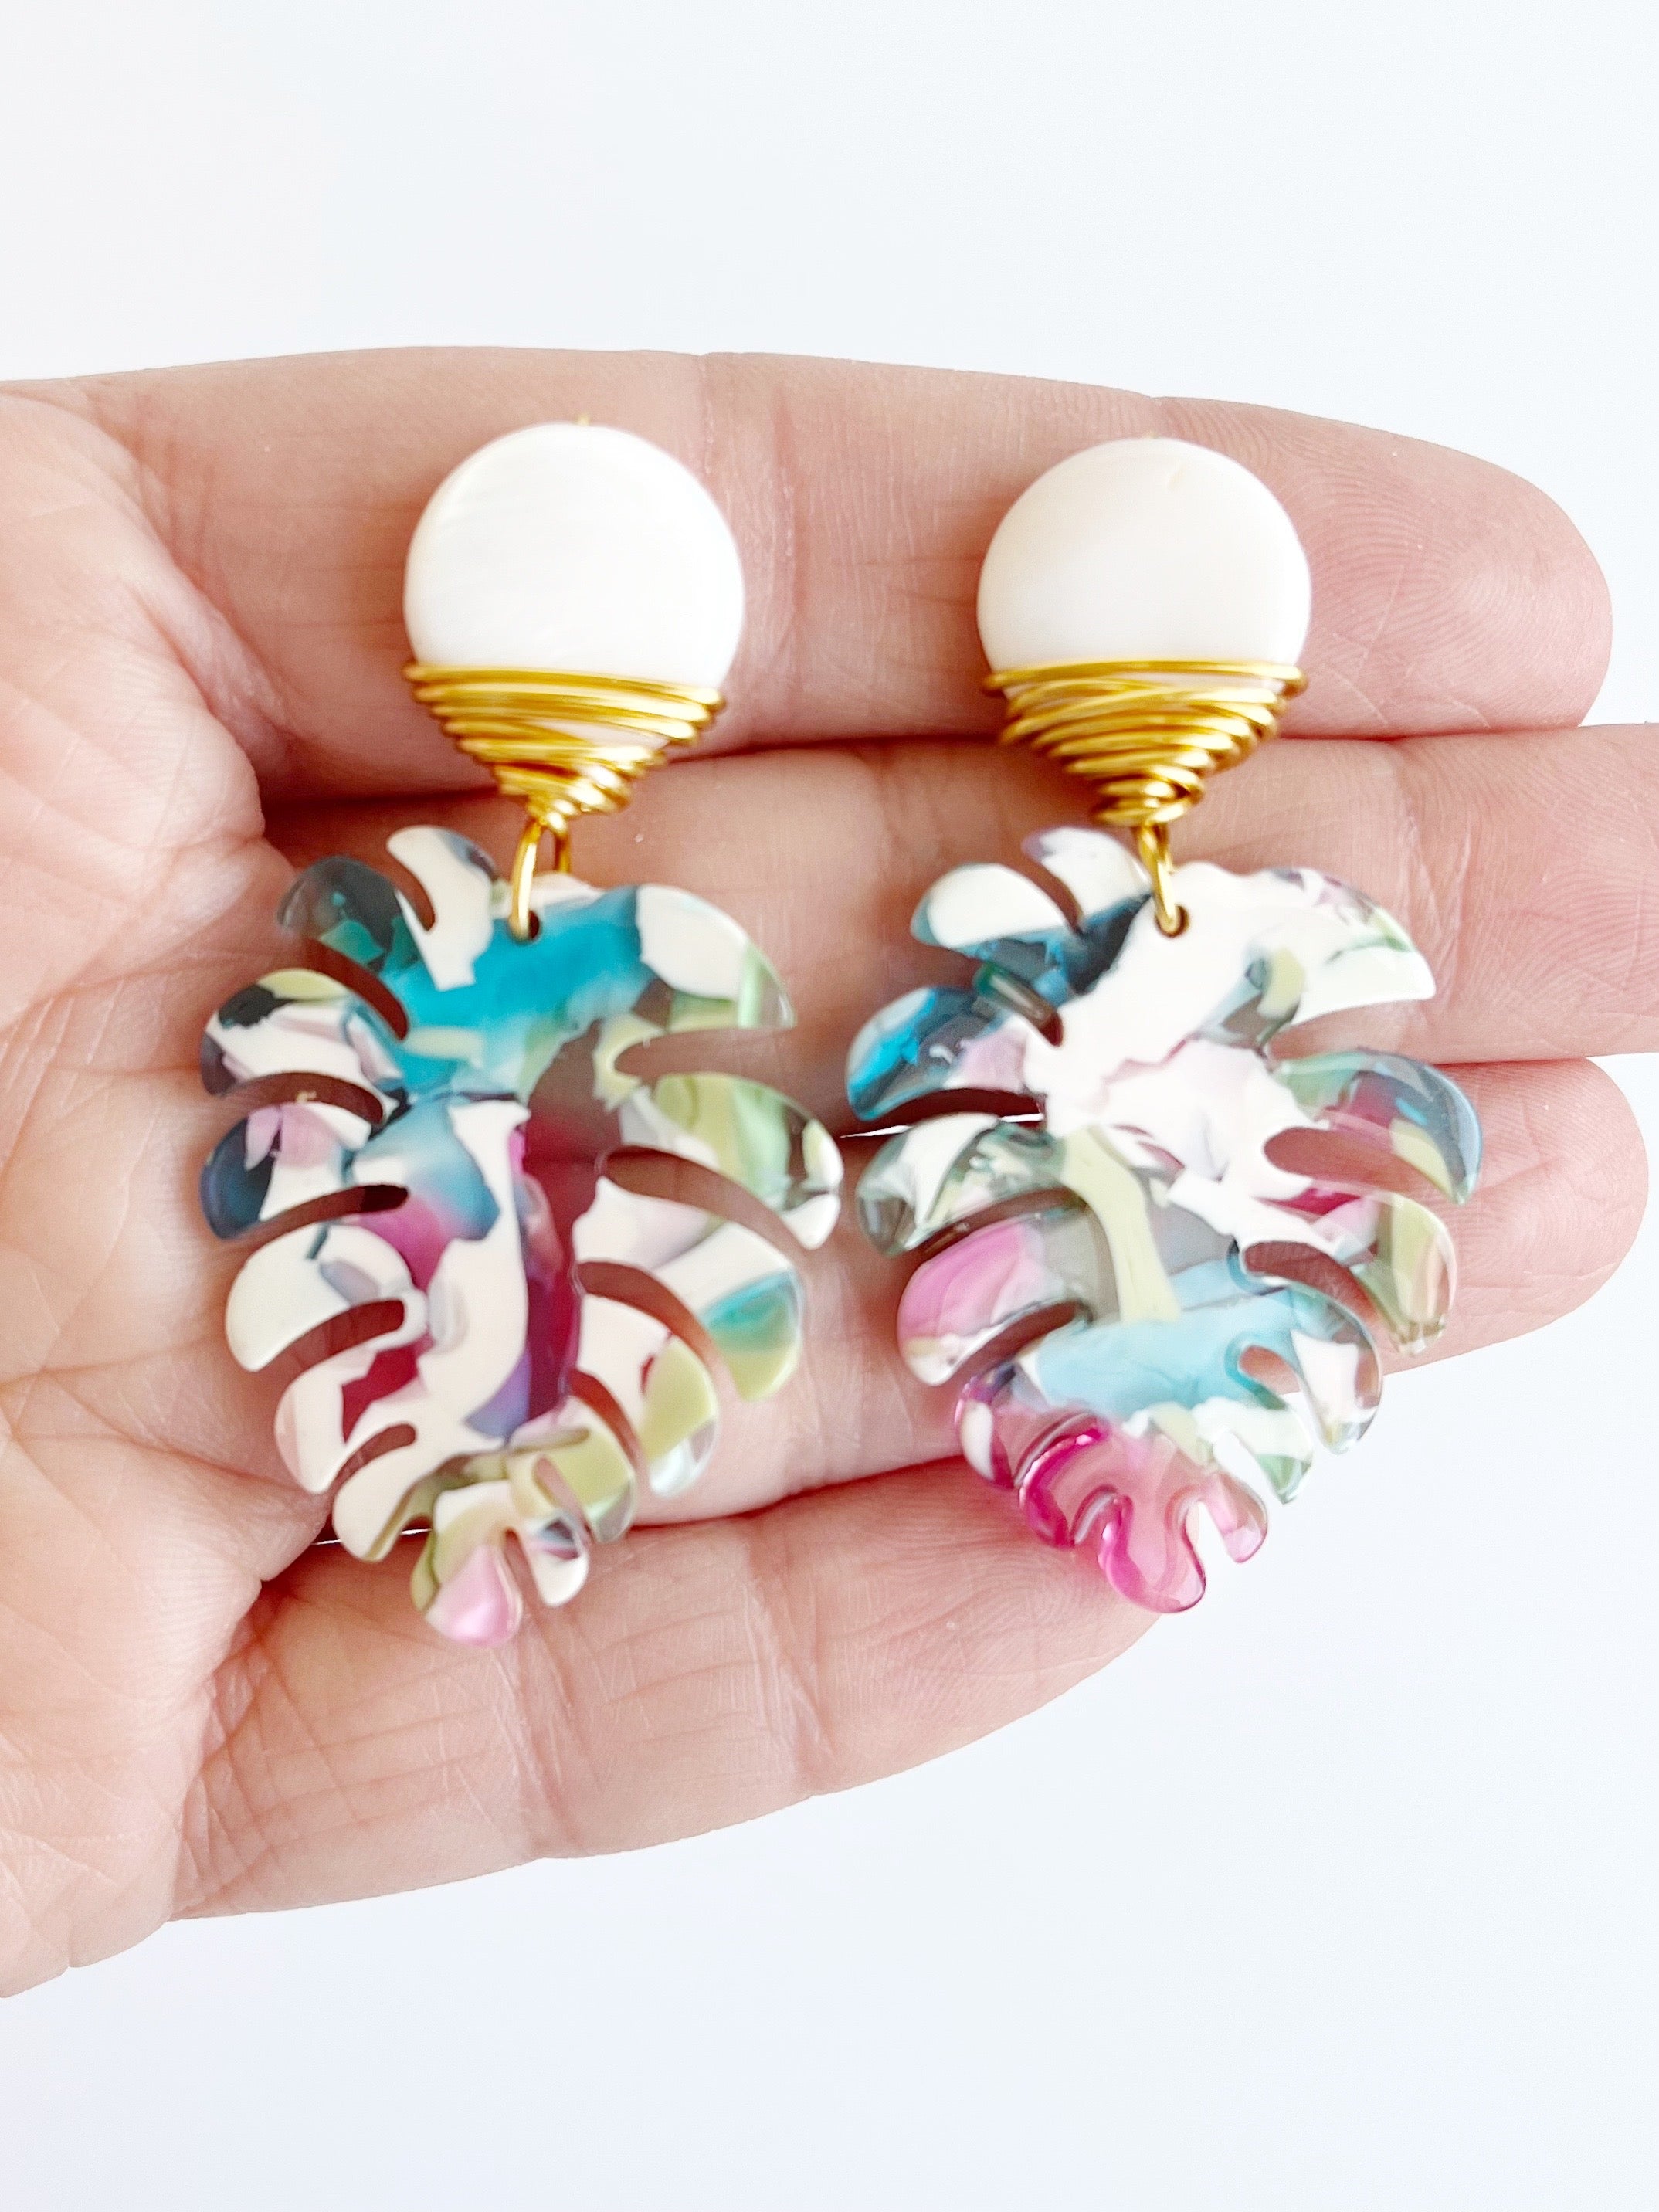 Hand holding Mini Palm Dangle Leaf Earrings in Blue, Pink, and White wrapped with gold plated wire earrings